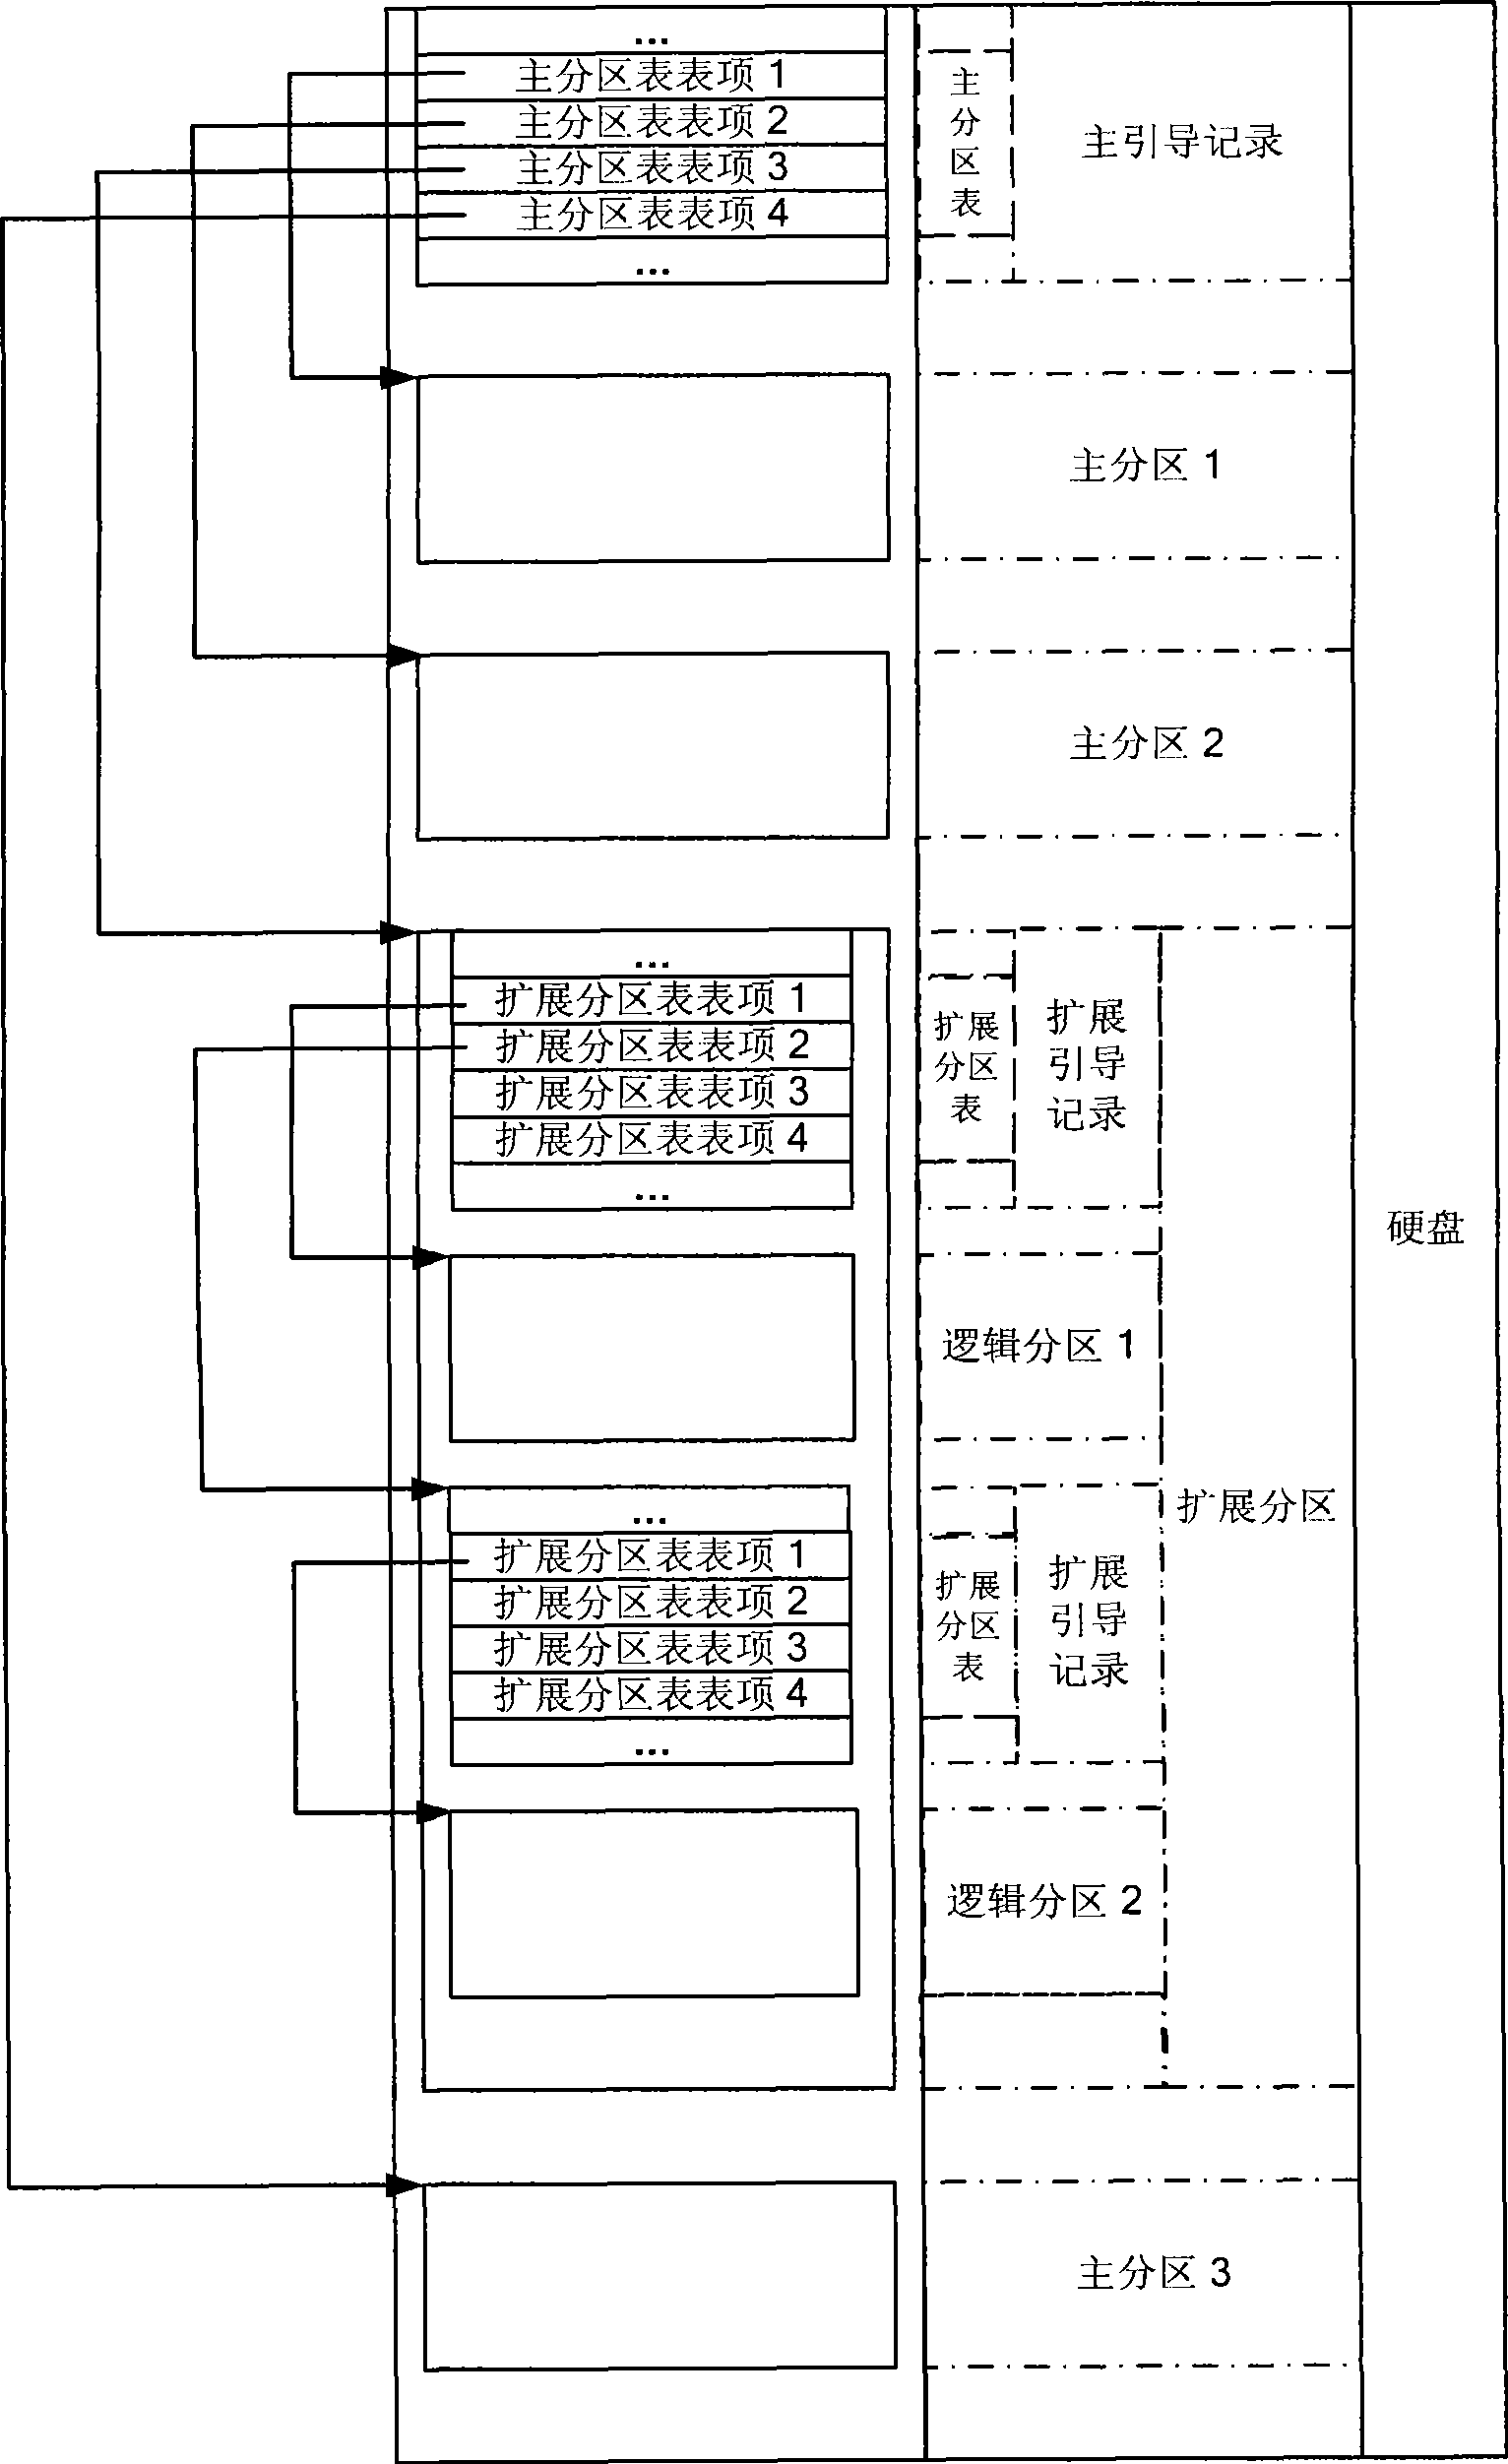 Computer system and method for constructing virtual storage device based on sectorization management